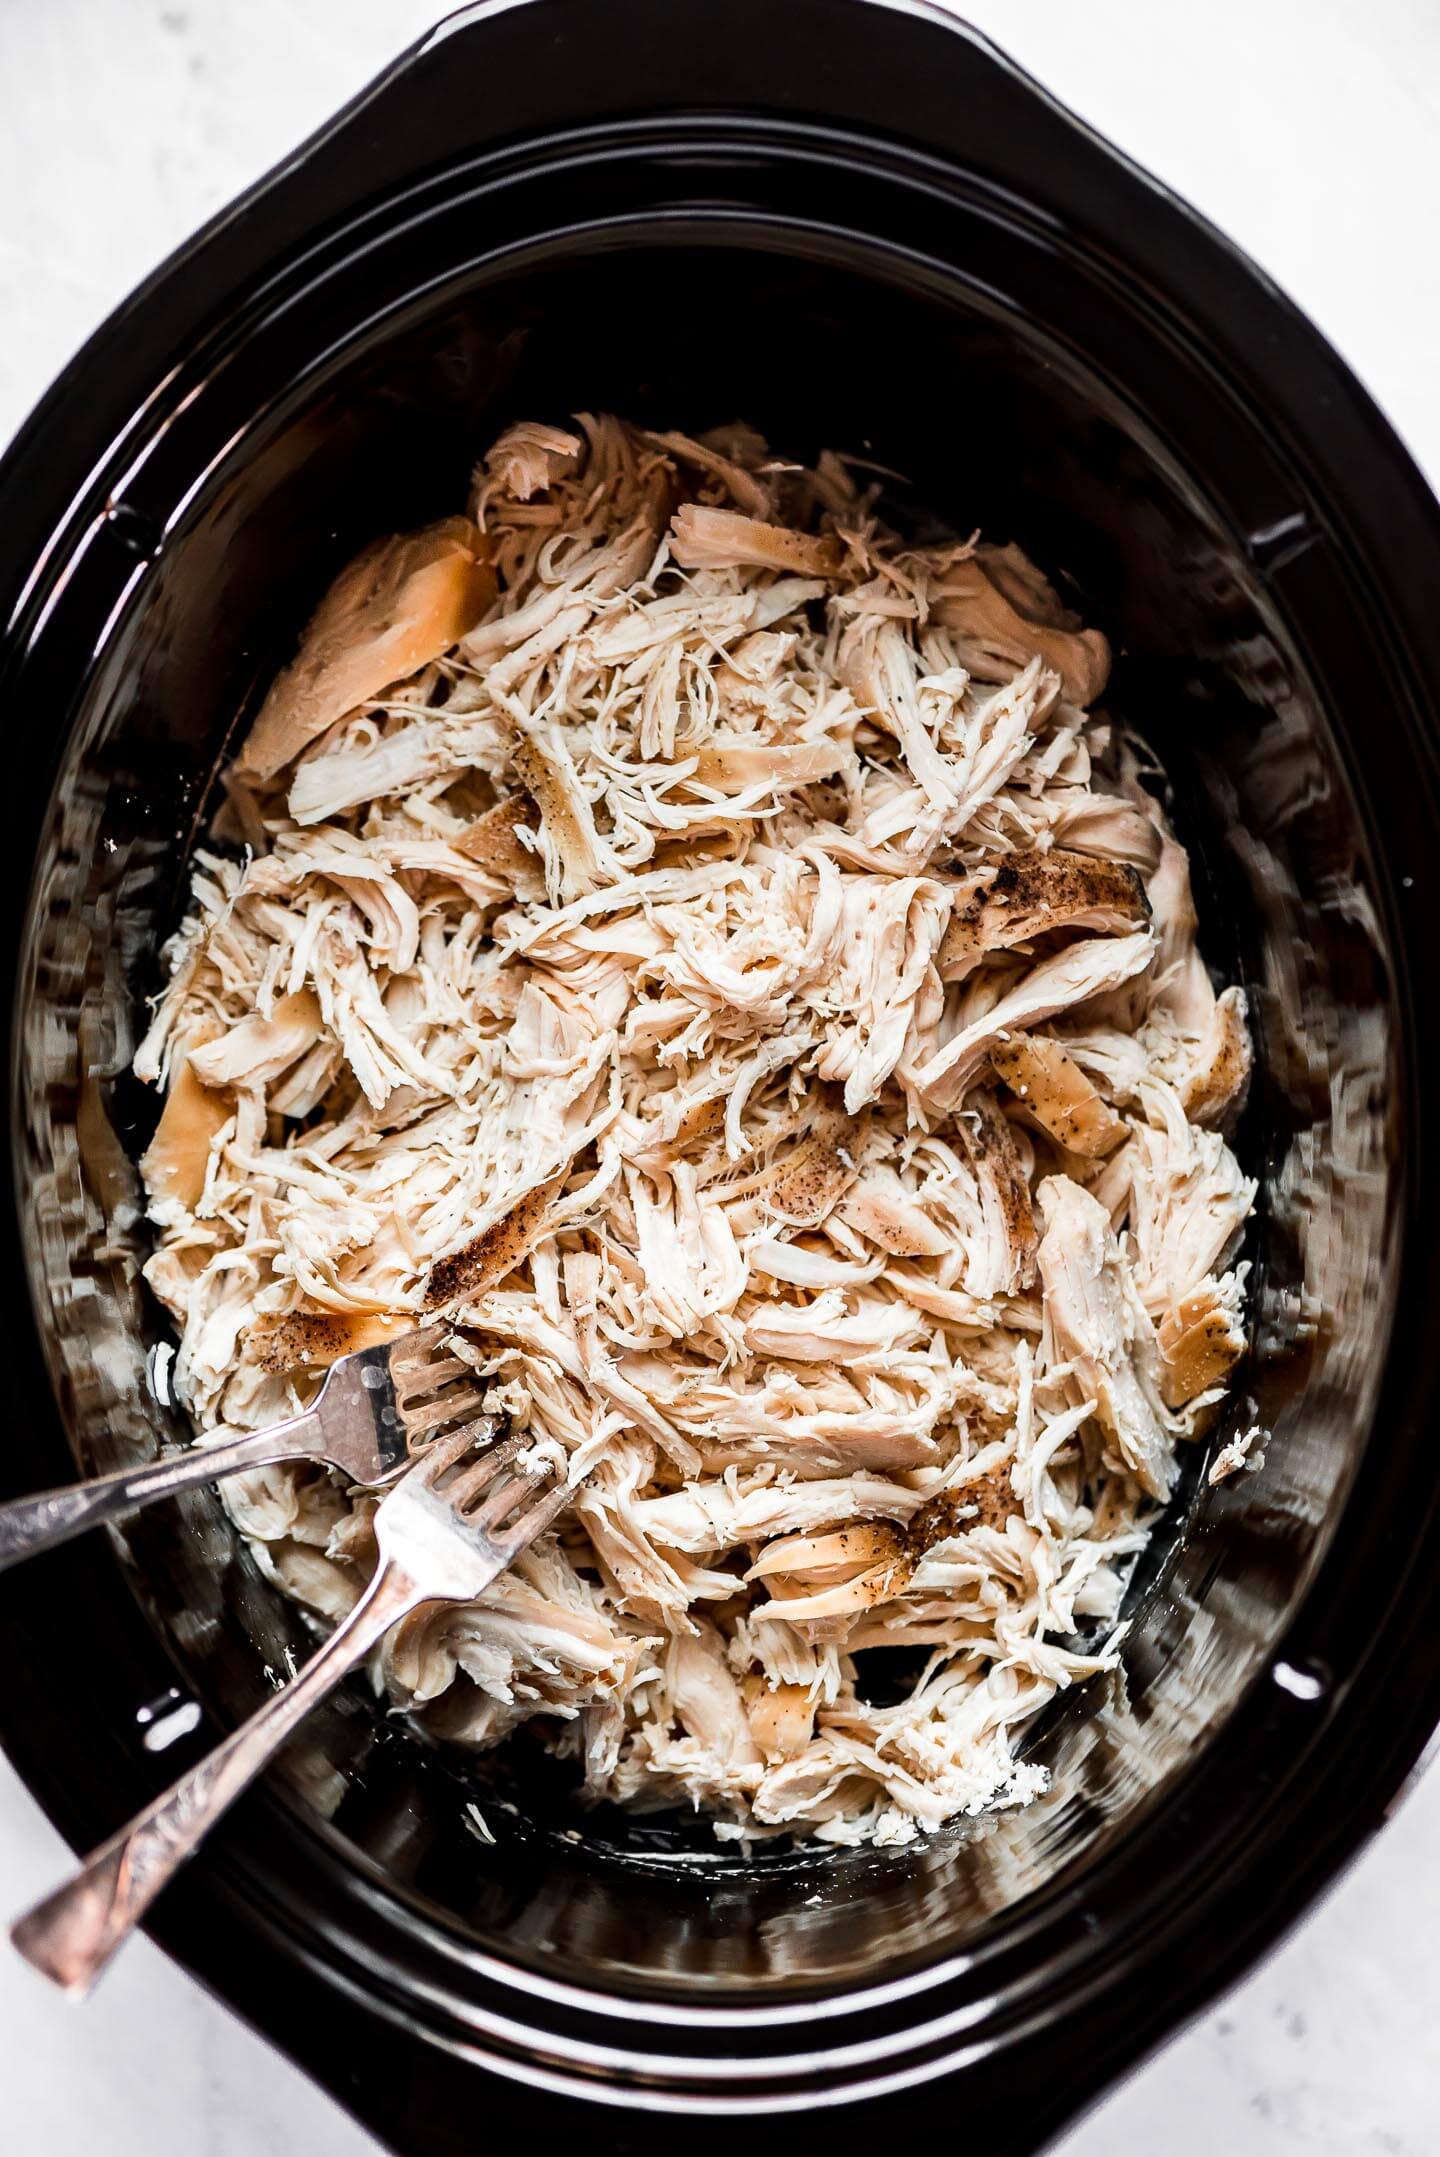 Top view of shredded chicken in a slow cooker with two forks at the side that were used for shredding.